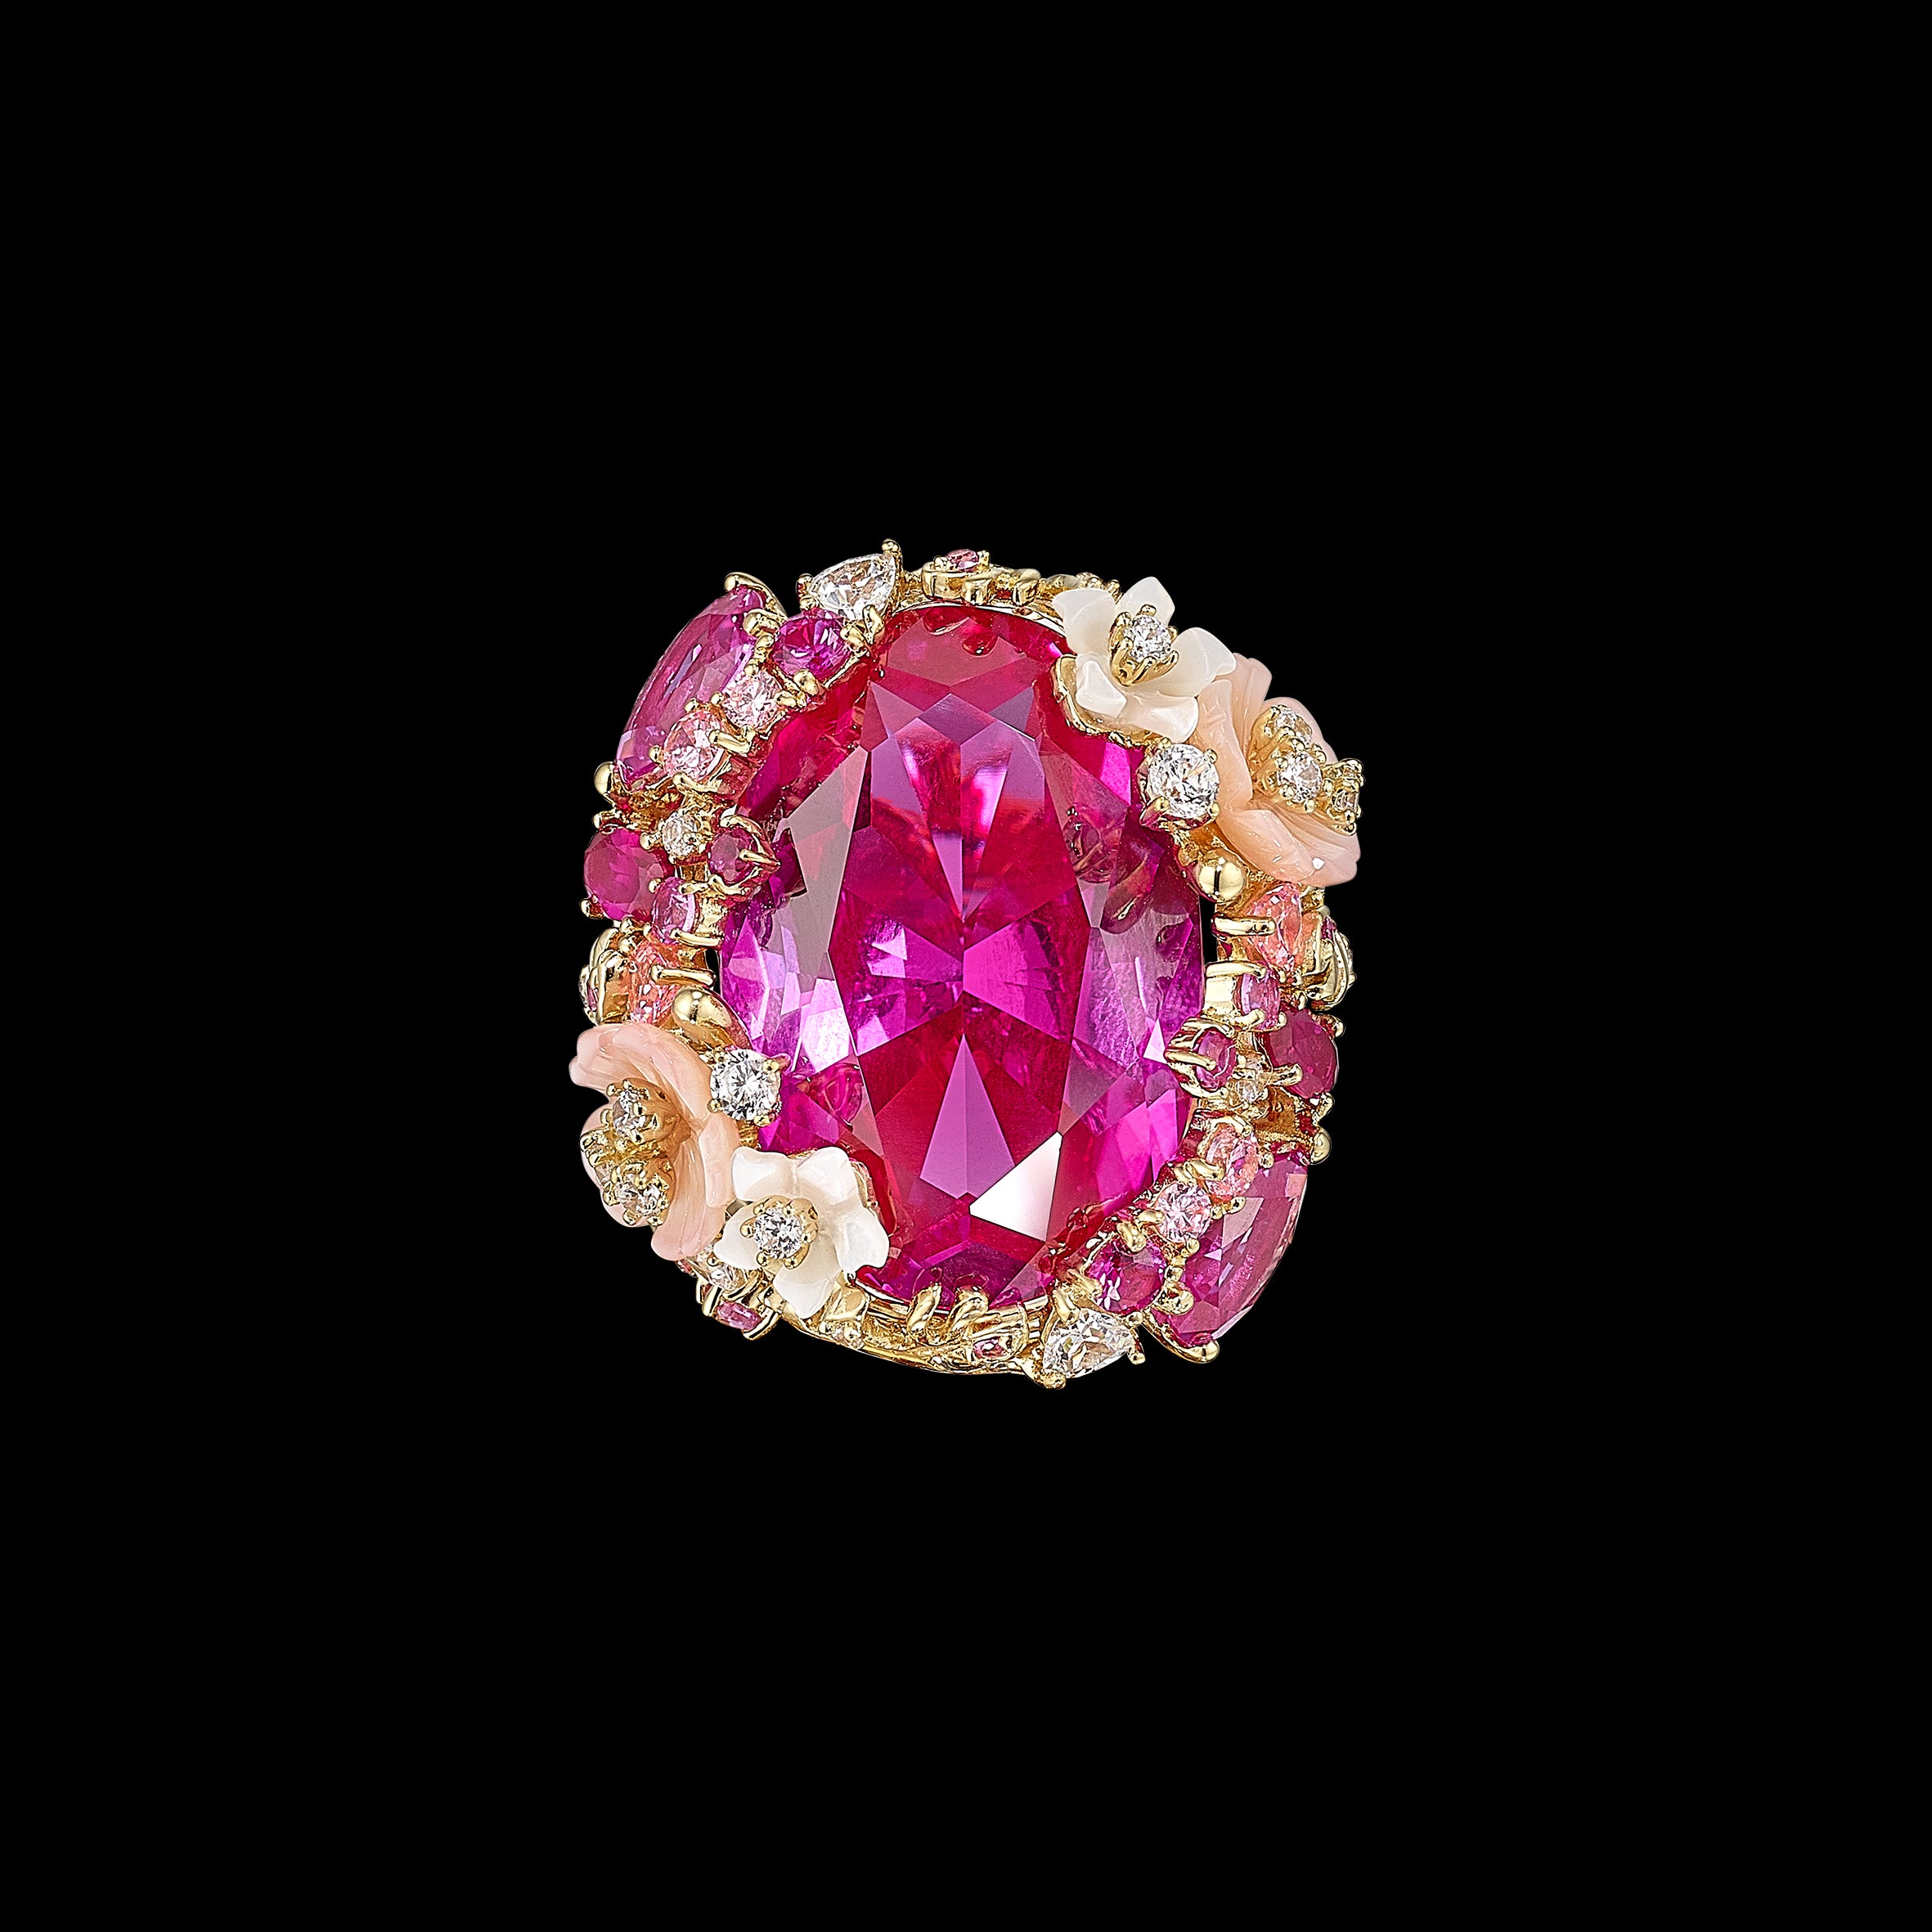 Fuchsia Paradise Ring, Ring, Anabela Chan Joaillerie - Fine jewelry with laboratory grown and created gemstones hand-crafted in the United Kingdom. Anabela Chan Joaillerie is the first fine jewellery brand in the world to champion laboratory-grown and created gemstones with high jewellery design, artisanal craftsmanship and a focus on ethical and sustainable innovations.